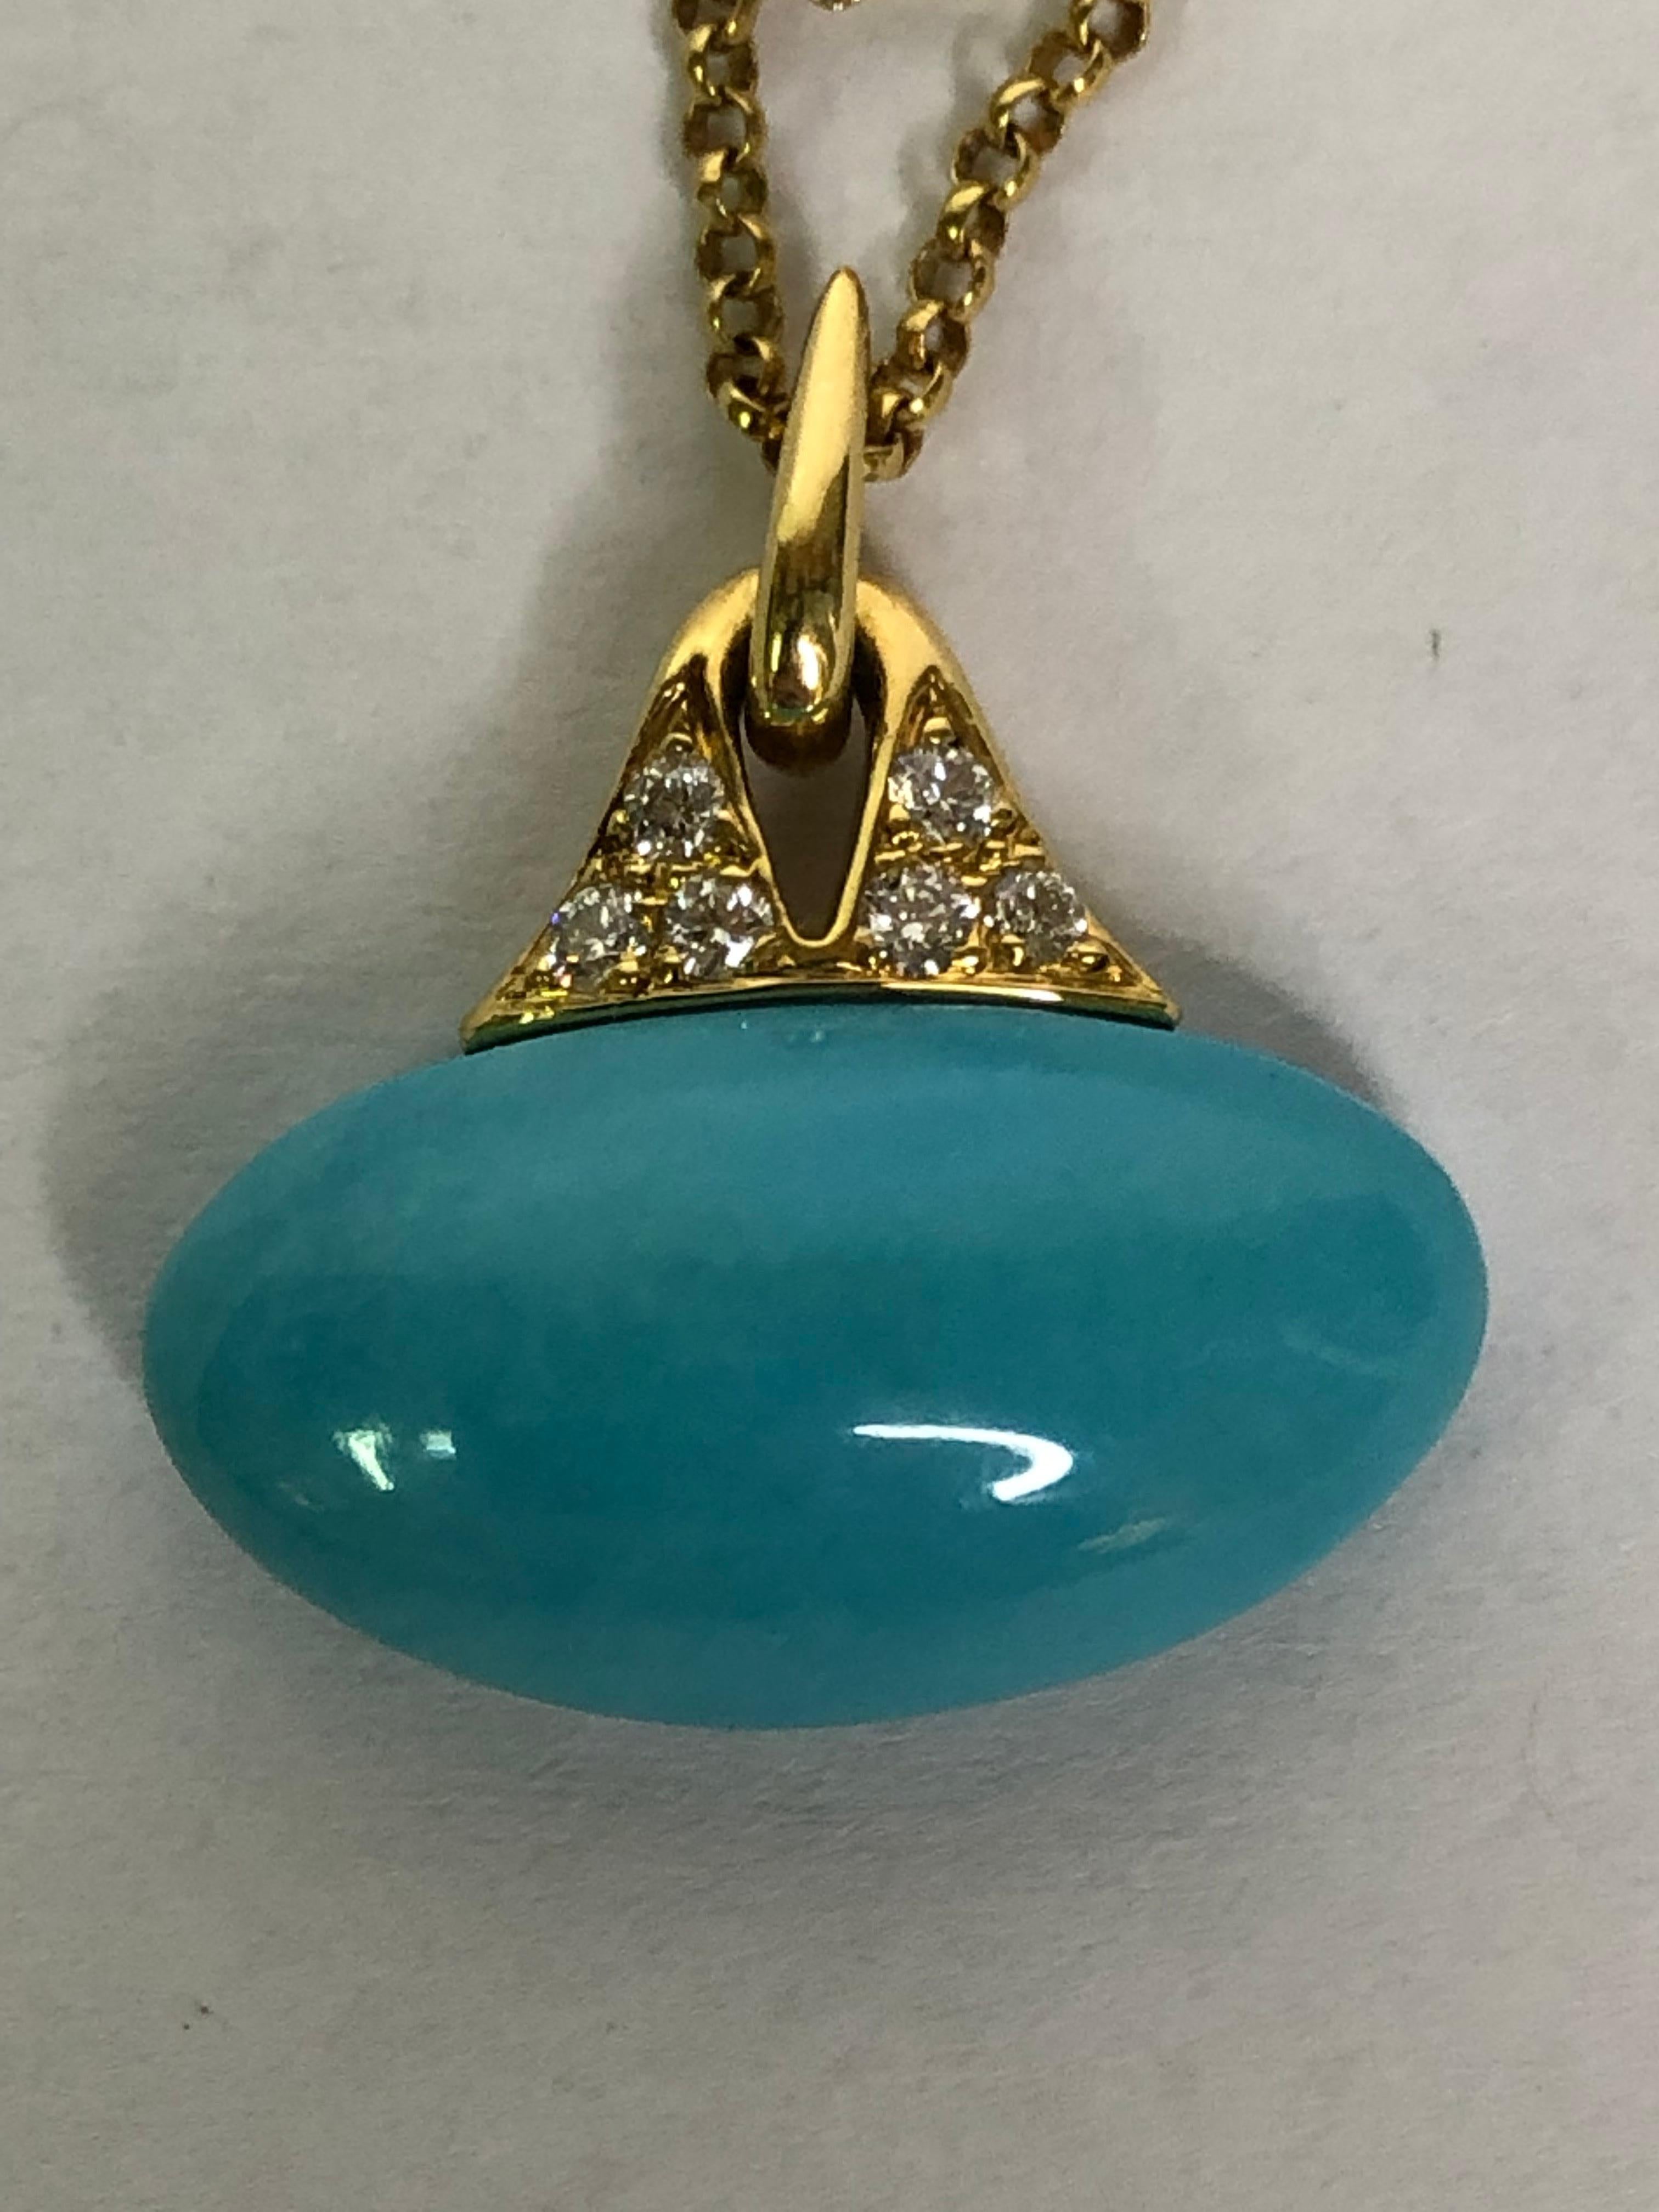 This piece is elegant and simple, to be worn everyday; great alone or layered with other pieces!
By designer Michael Bondanza.
18 karat yellow gold diamond decorative accent attaches an oval 'bean' shape turquoise.
6 round diamonds, approximately